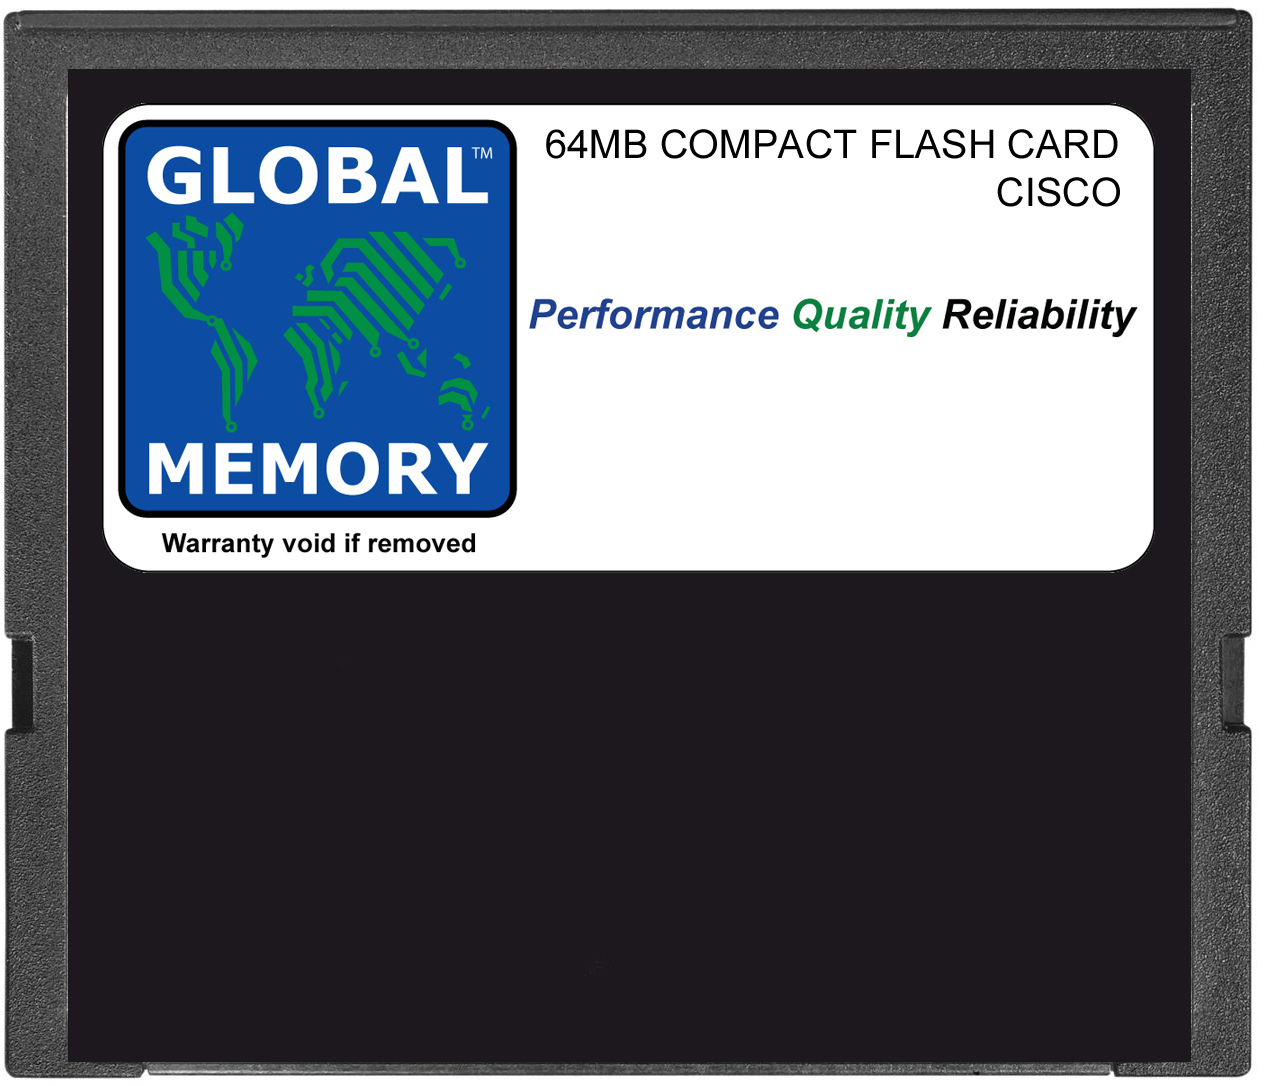 64MB COMPACT FLASH CARD MEMORY FOR CISCO 3631 ROUTER (MEM3631-64CF)